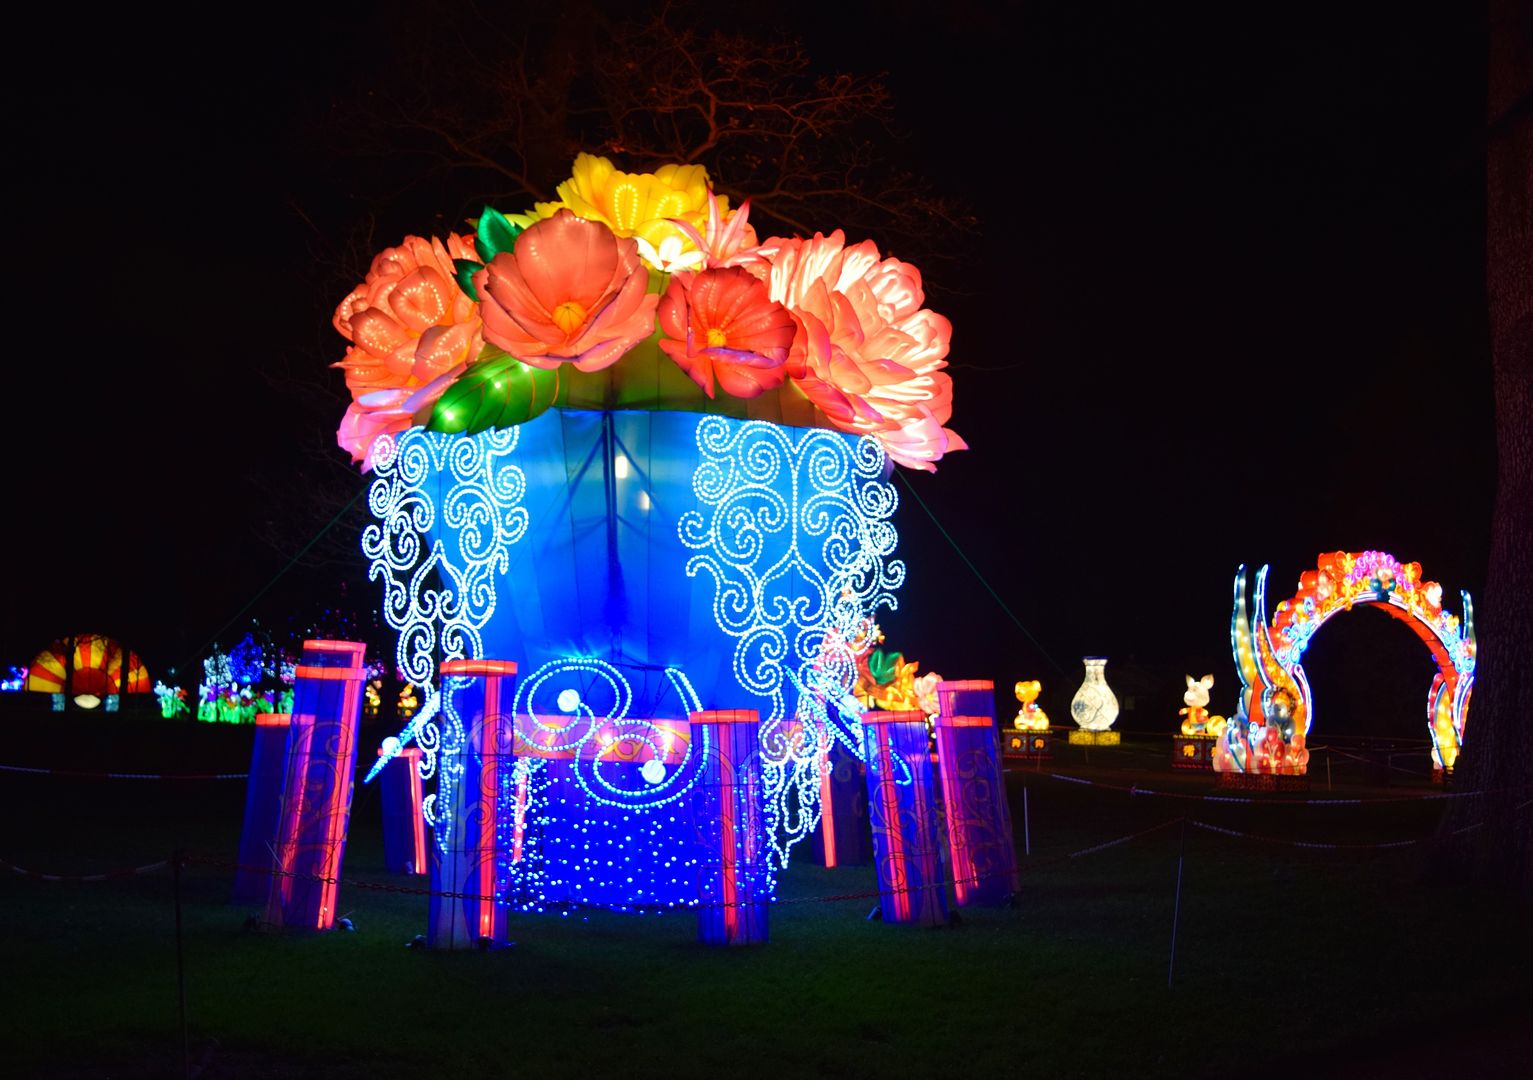 Flowers at Magical Lantern Festival Chiswick House | The LDN Diaries